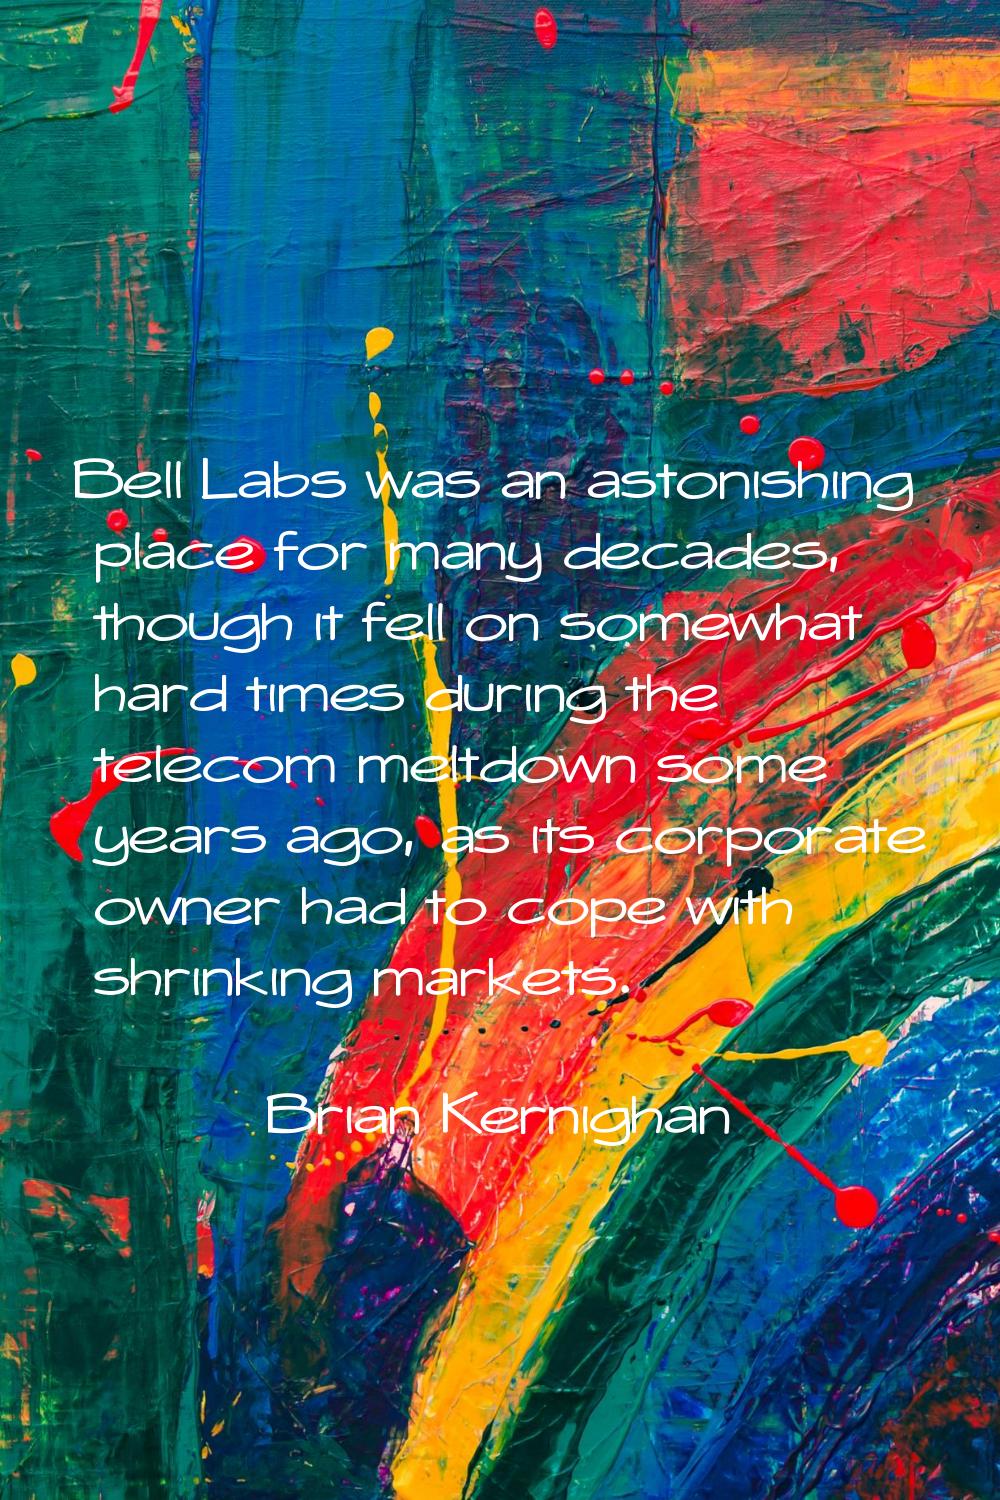 Bell Labs was an astonishing place for many decades, though it fell on somewhat hard times during t